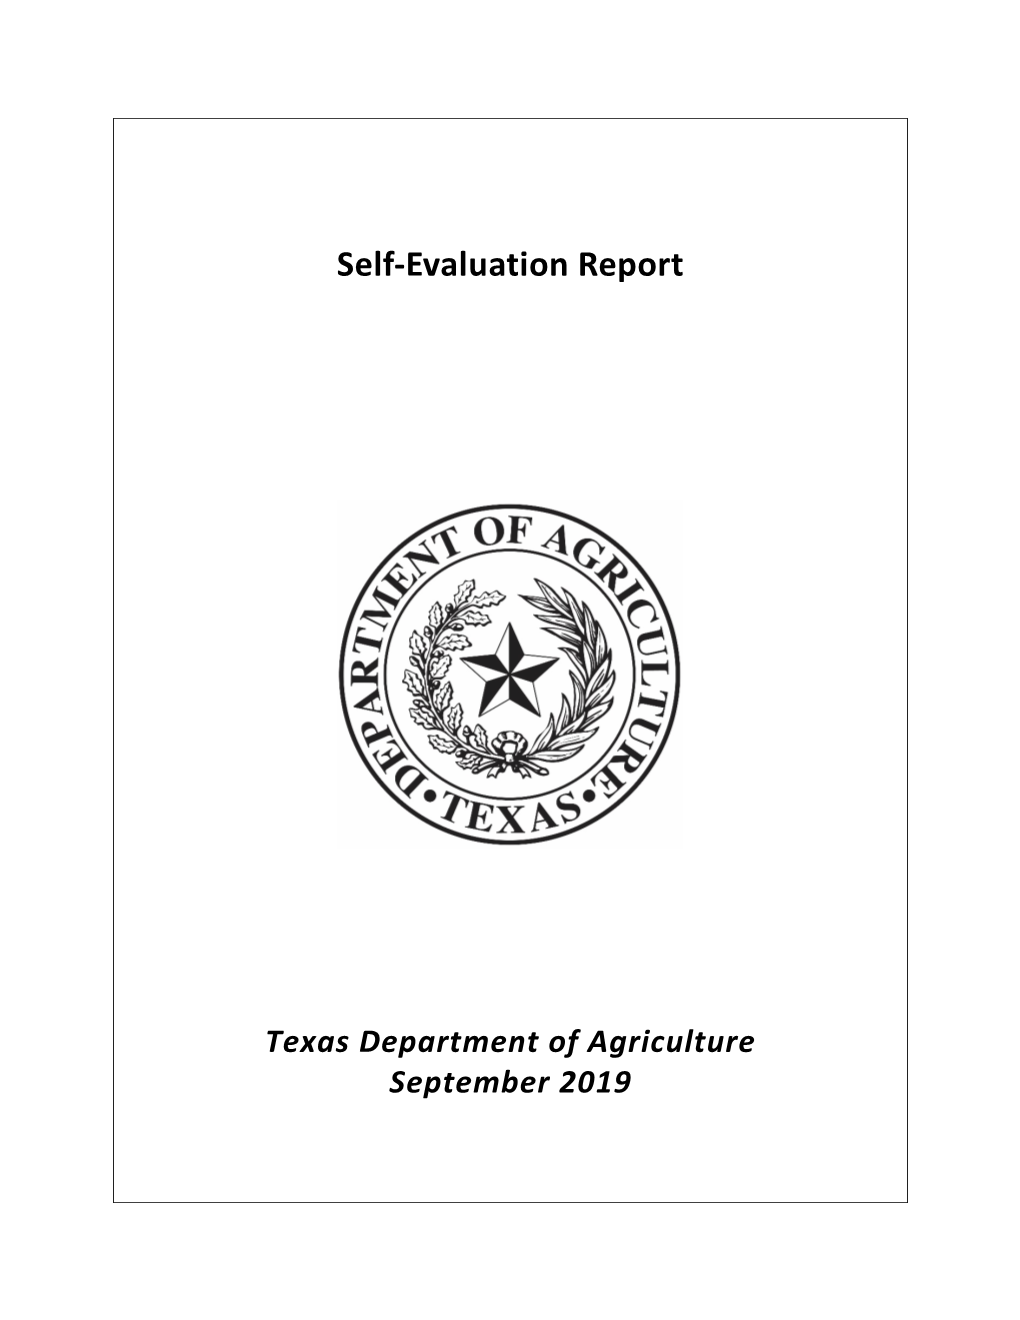 Texas Department of Agriculture Self-Evaluation Report